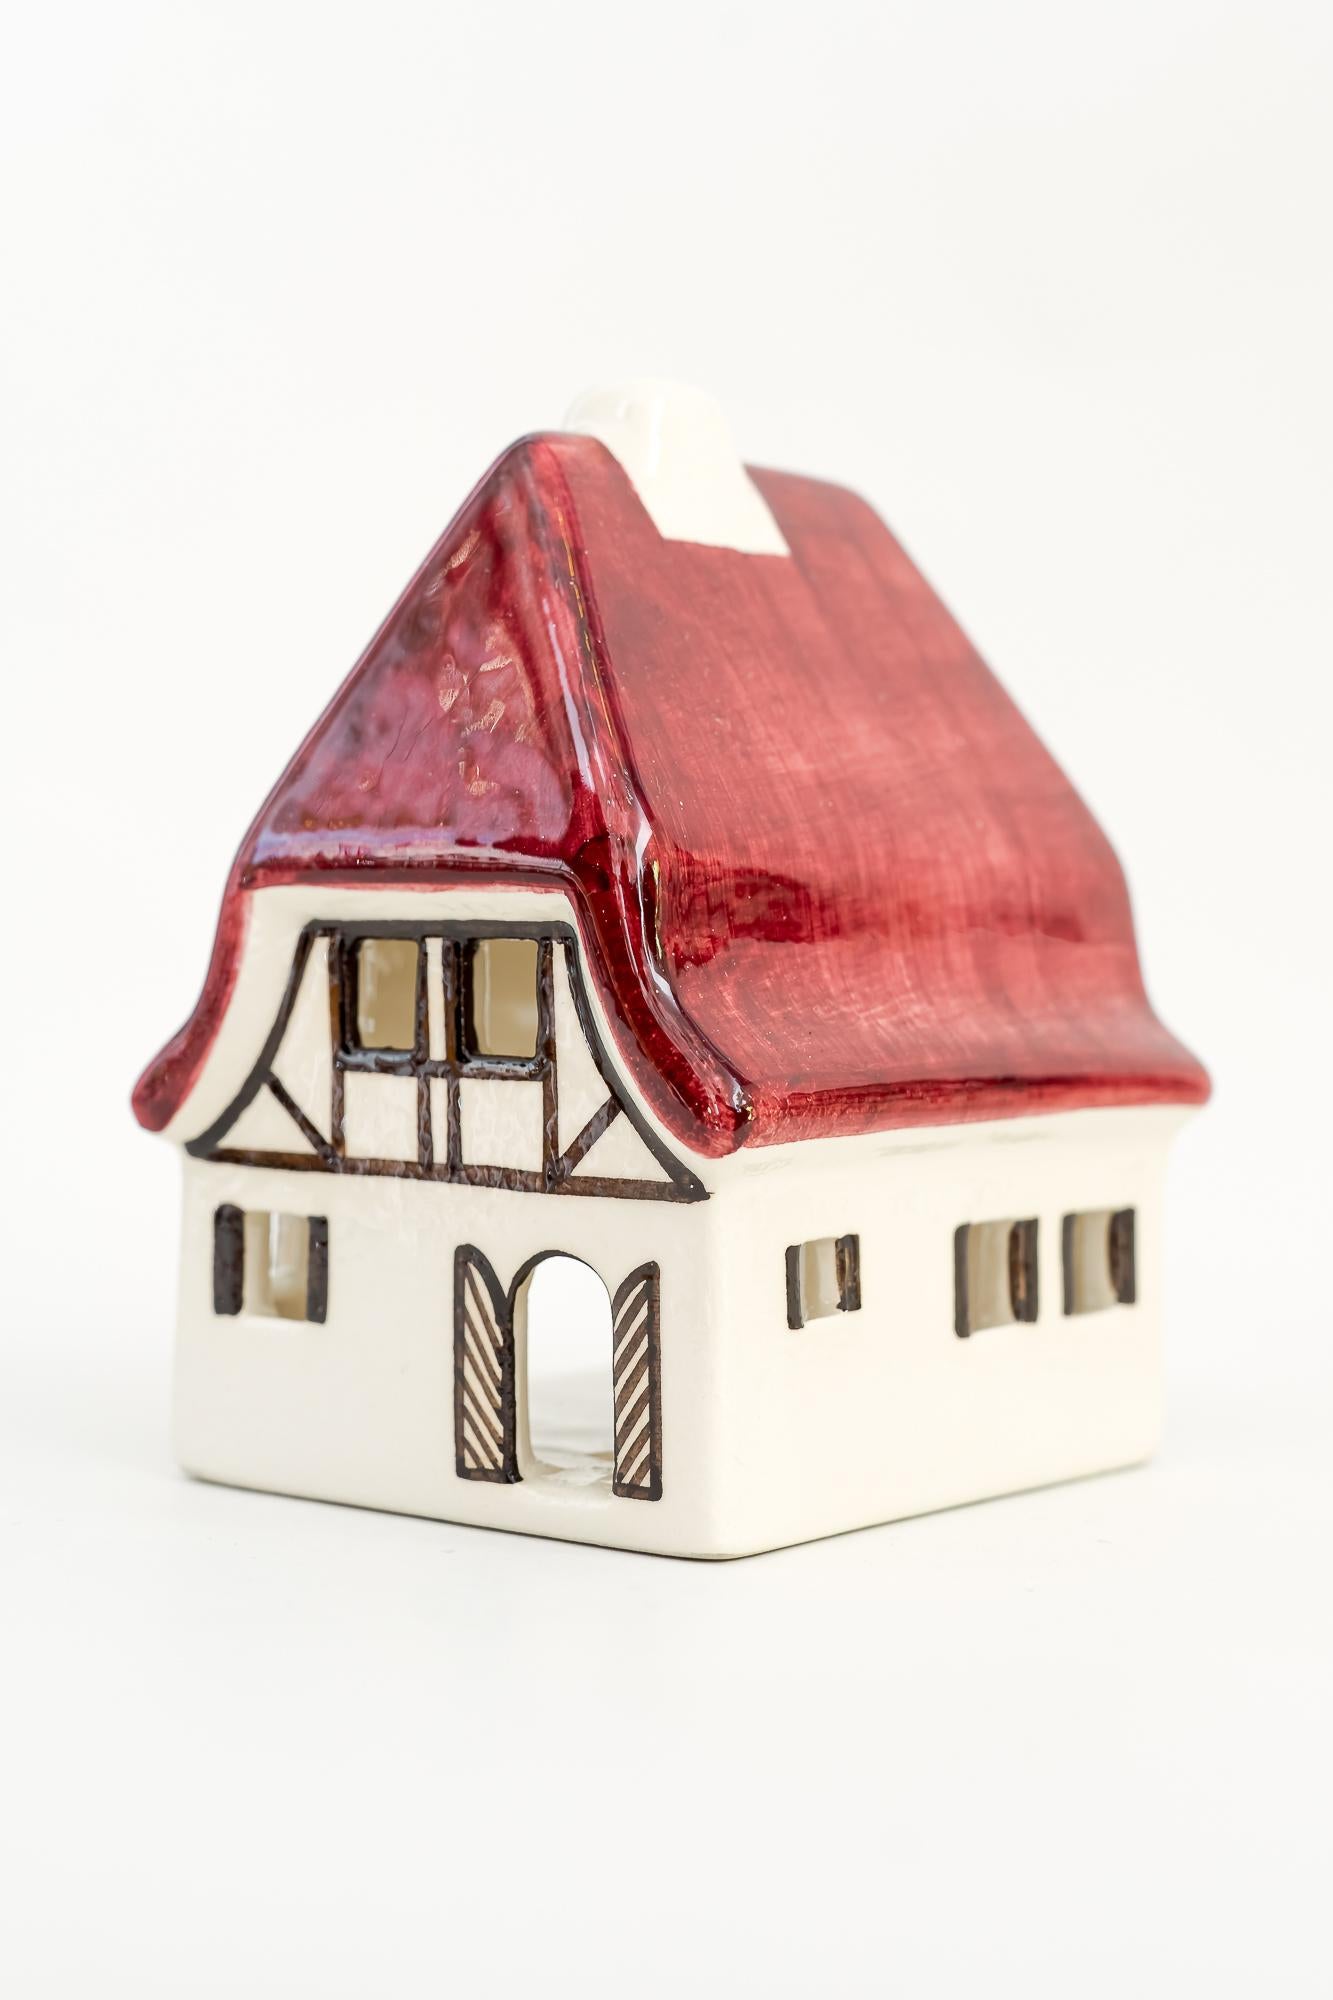 Christmas Ceramic Houses for Candle Light Deco in Shape of a Village Around 1970 For Sale 1